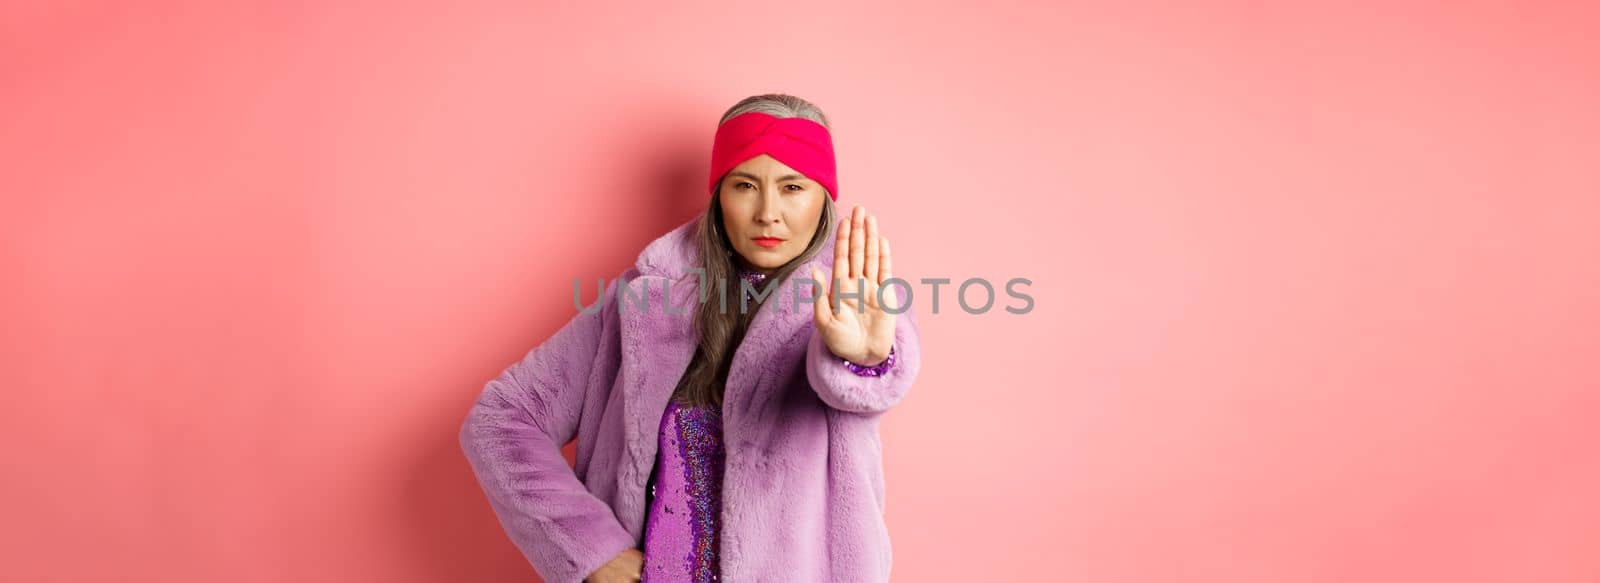 Fashion and shopping concept. Serious asian senior woman showing stop sign to warn and prohibit something, looking determined at camera, wearing stylish purple clothes.